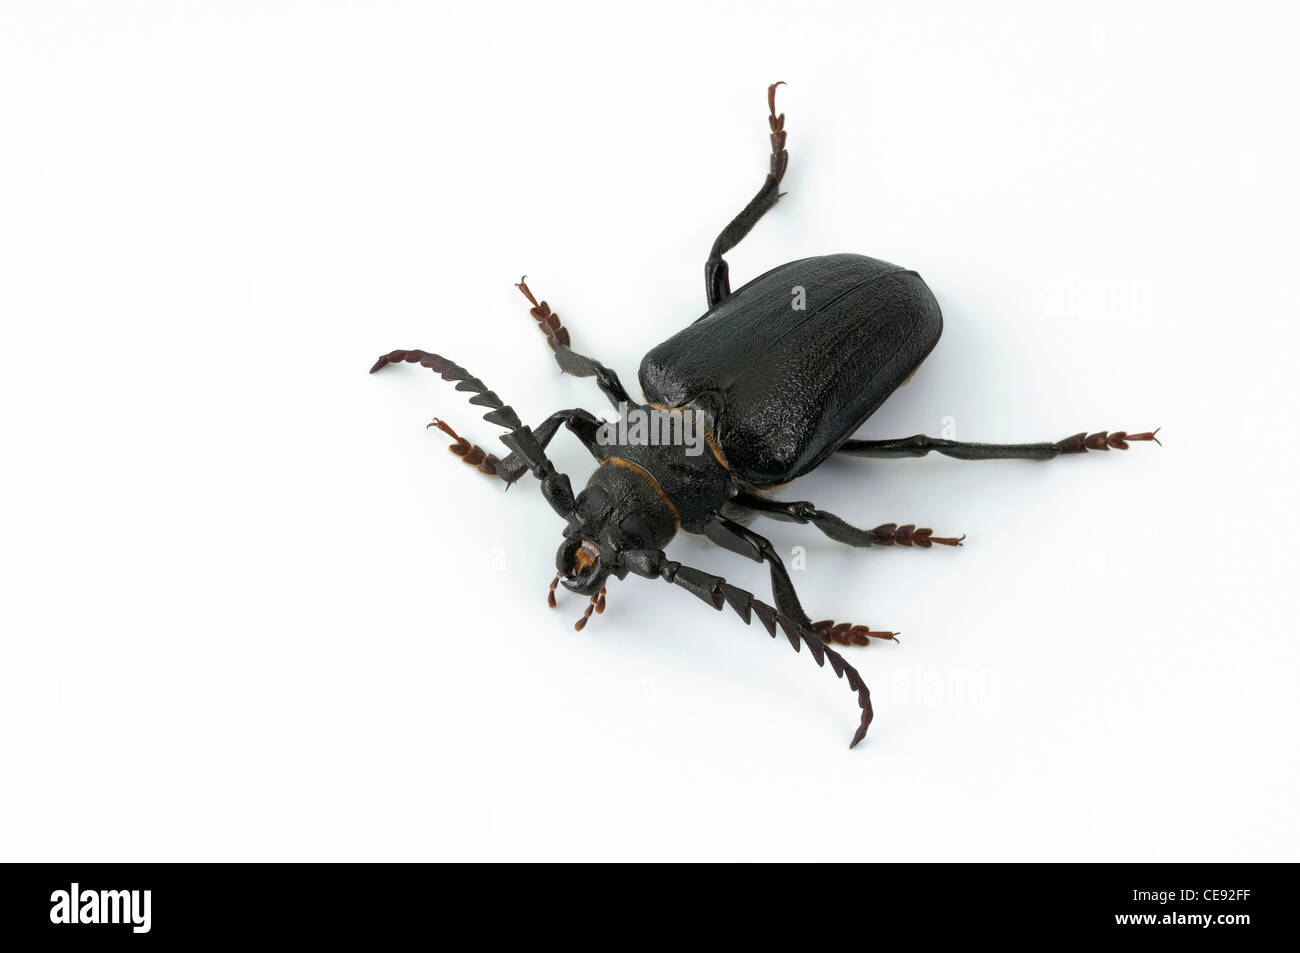 The Tanner, The Sawyer (Prionus coriarius). Beetle, studio picture against a white background. Stock Photo